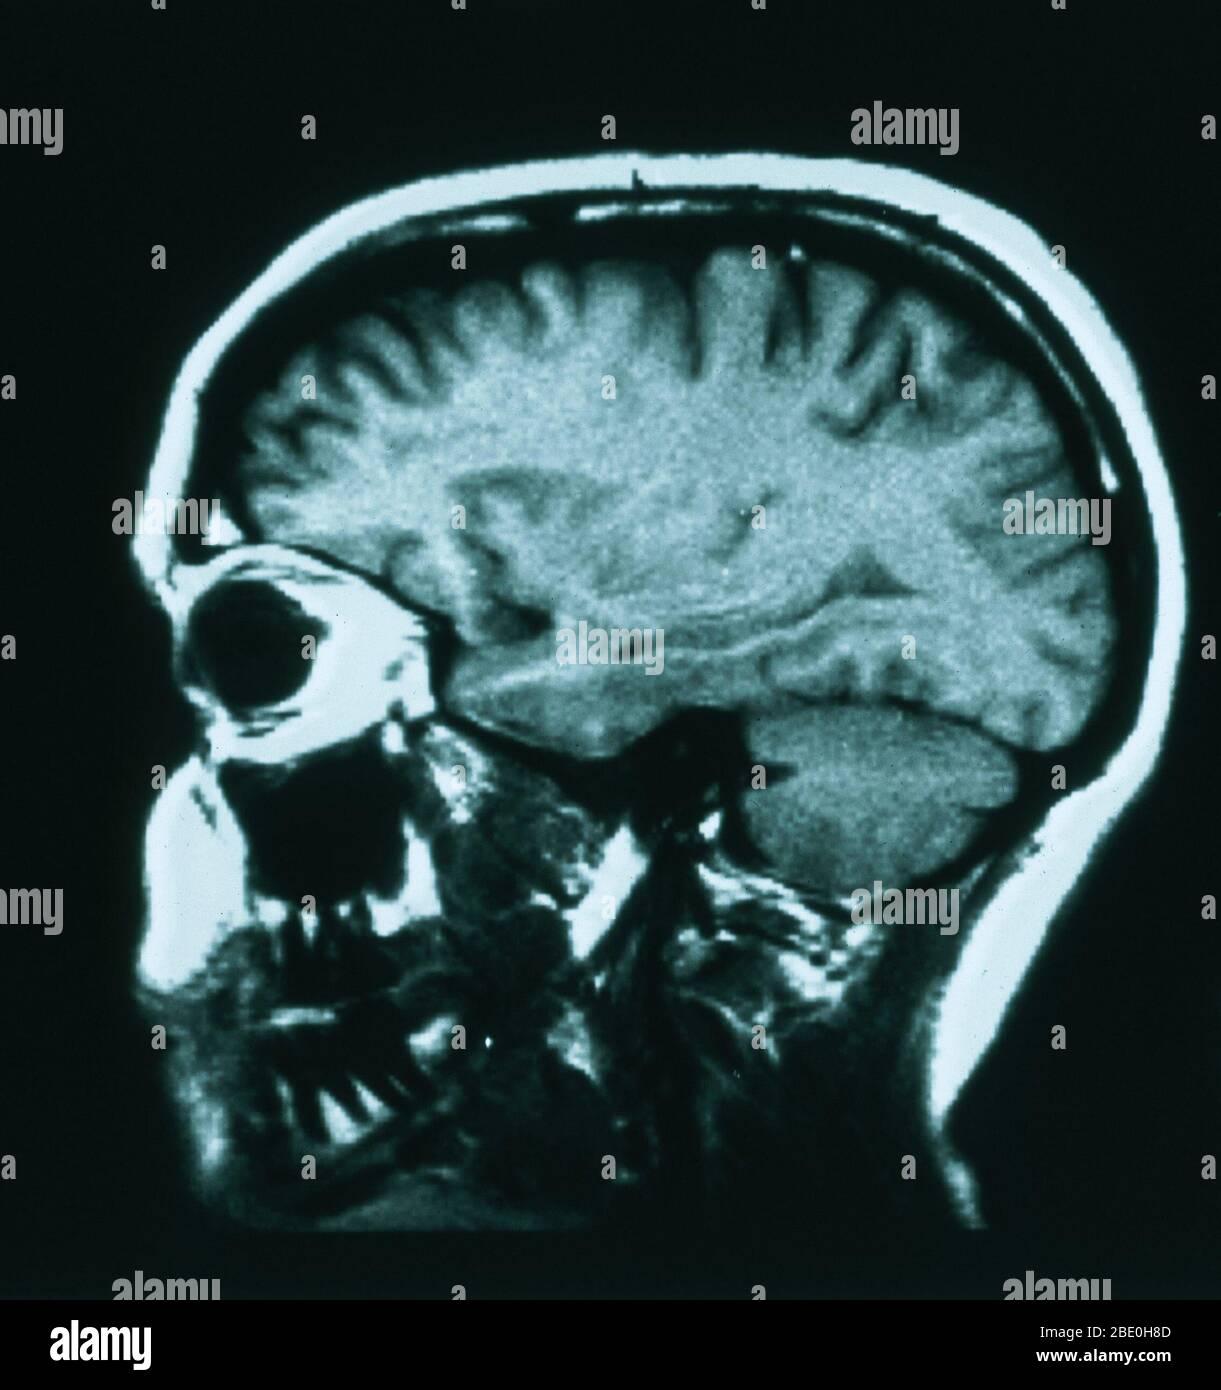 Sagittal (from the side) T1 weighted MRI showing normal anatomy of the brain including: the cerebral cortex, corpus callosum, thalamus, medulla oblongata, cerebellum, and brainstem. Stock Photo